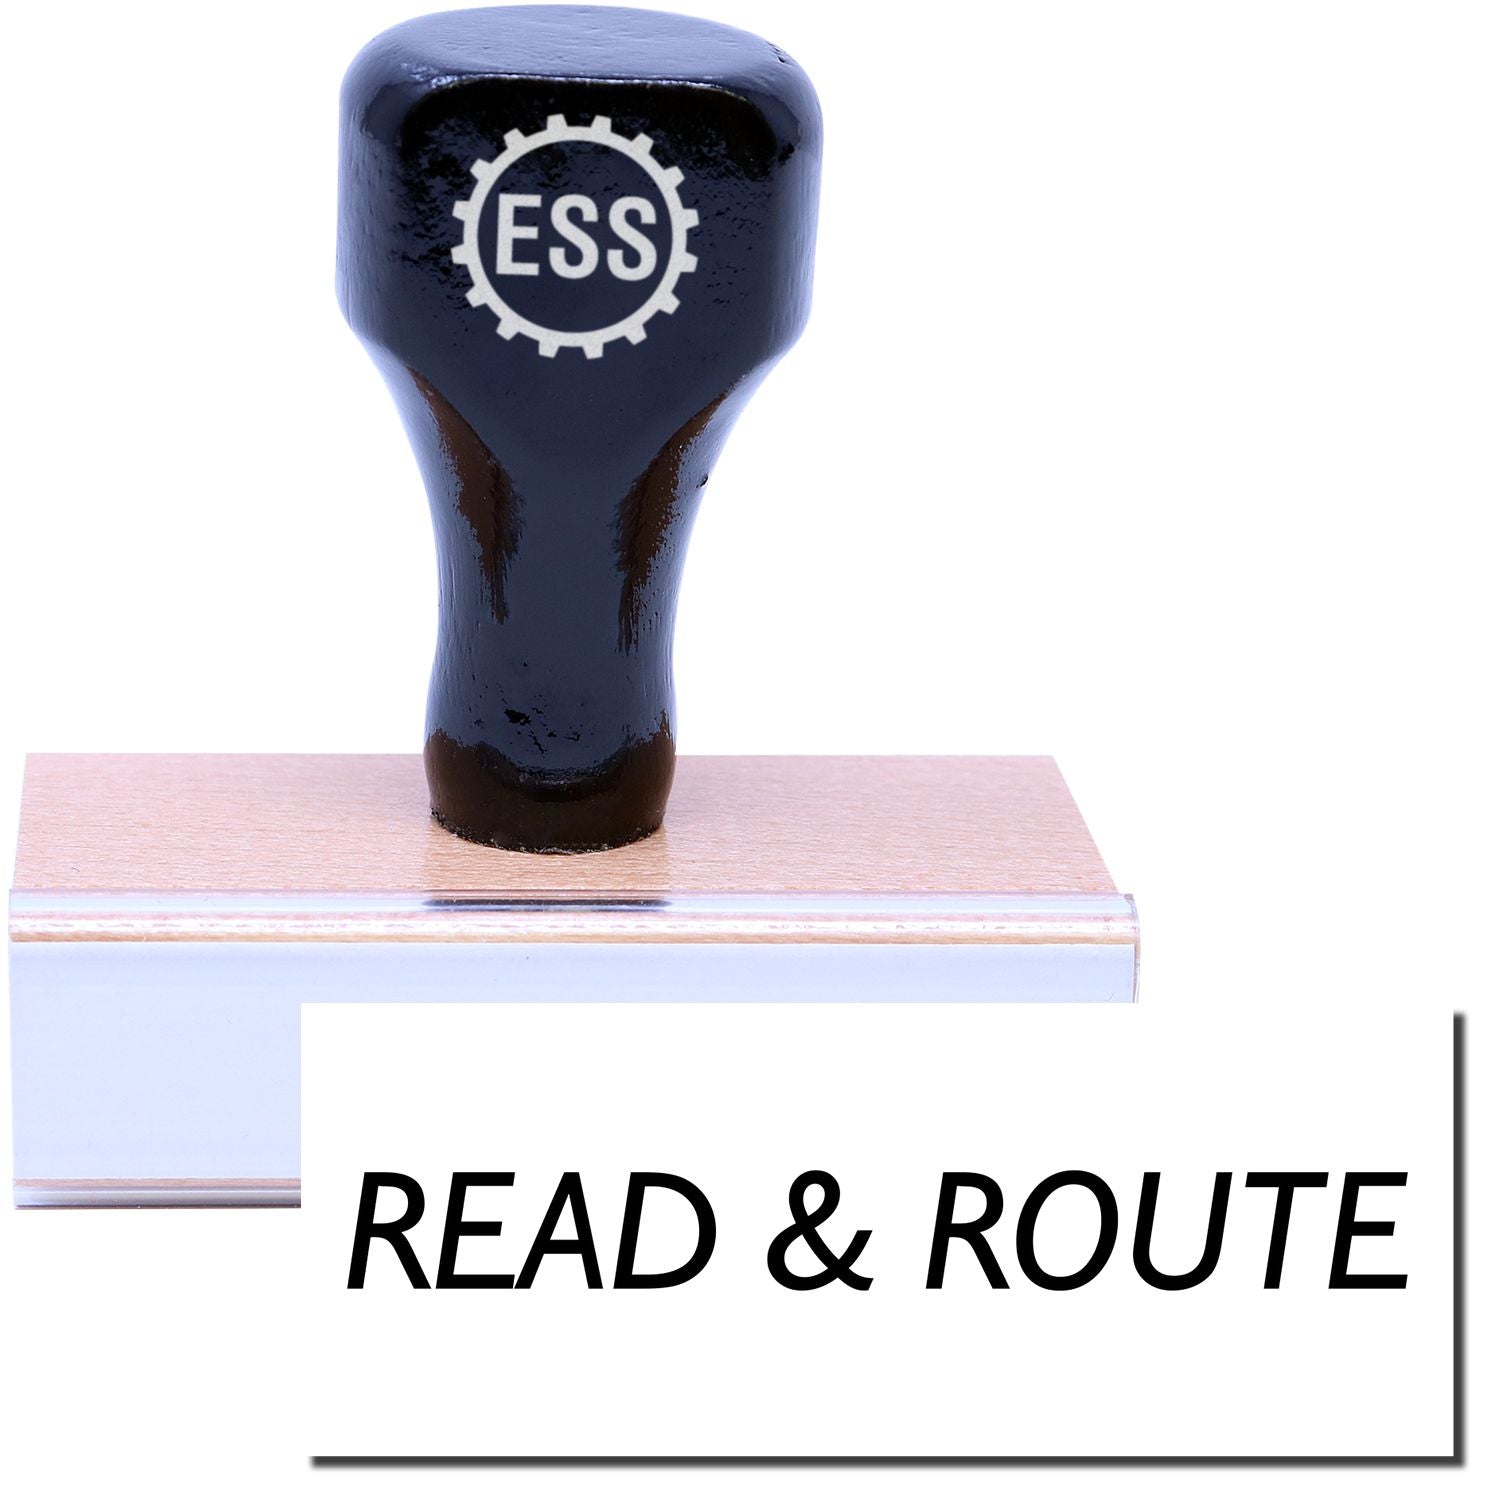 A stock office rubber stamp with a stamped image showing how the text "READ & ROUTE" in a large font is displayed after stamping.